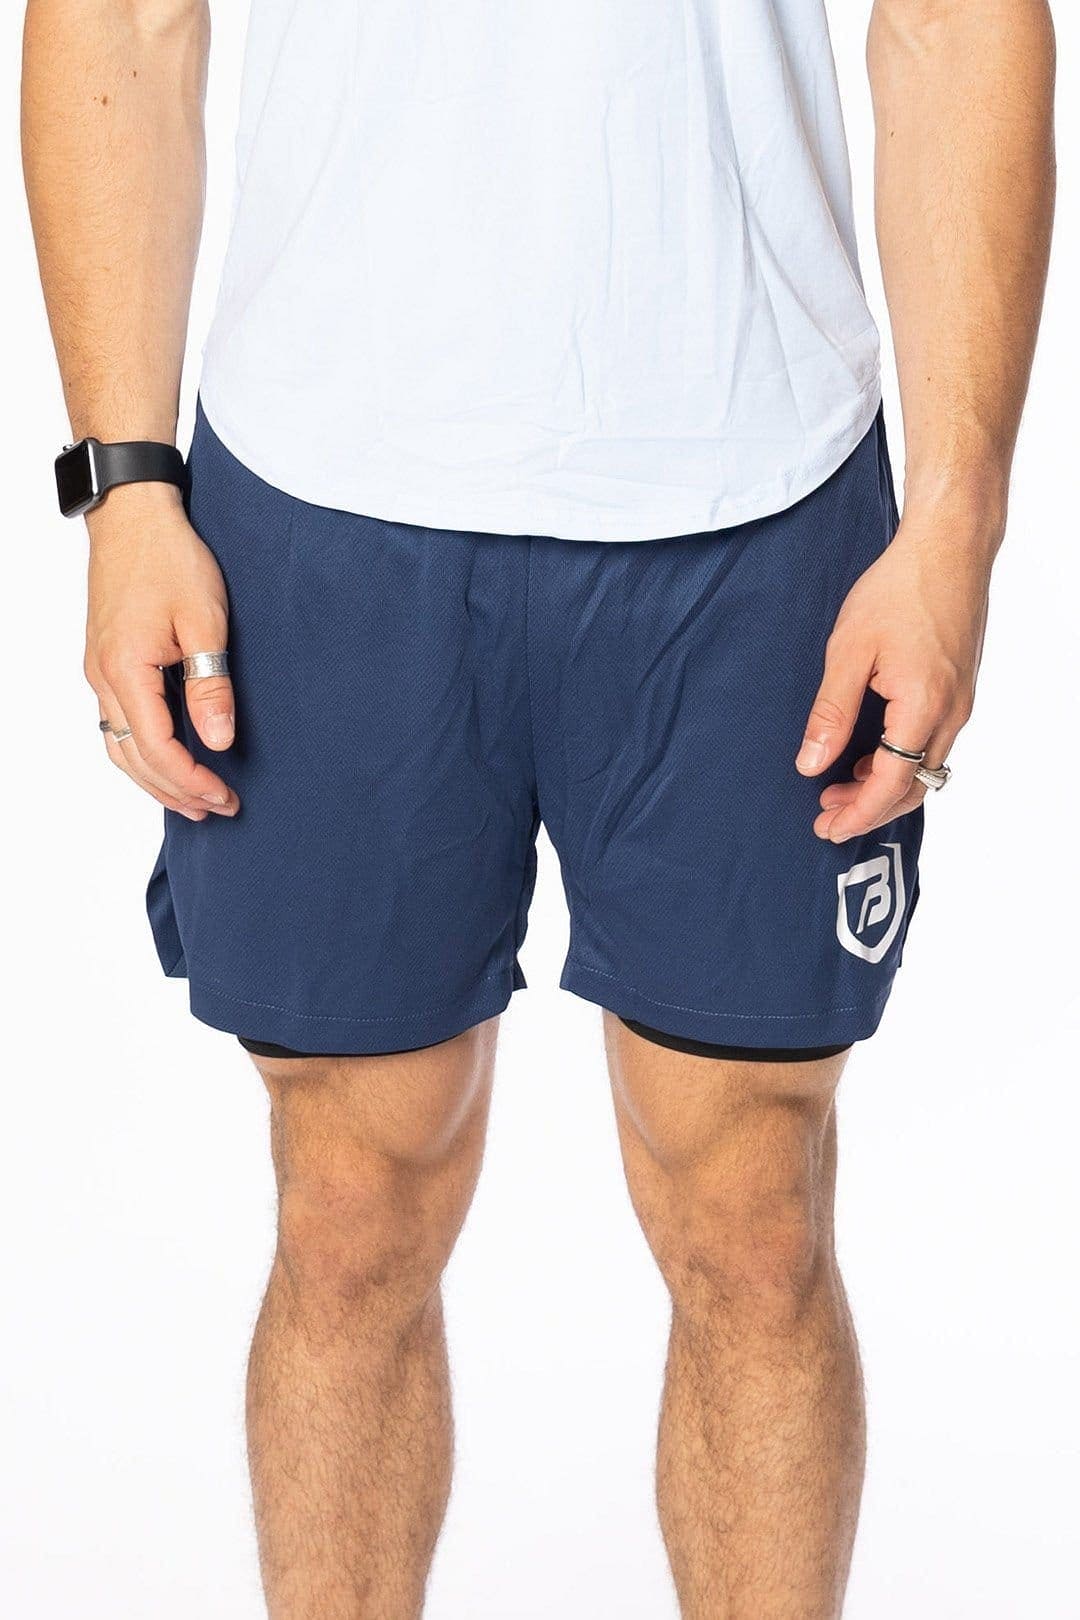 Blue Shorts with Skins - Brutal London Clothing